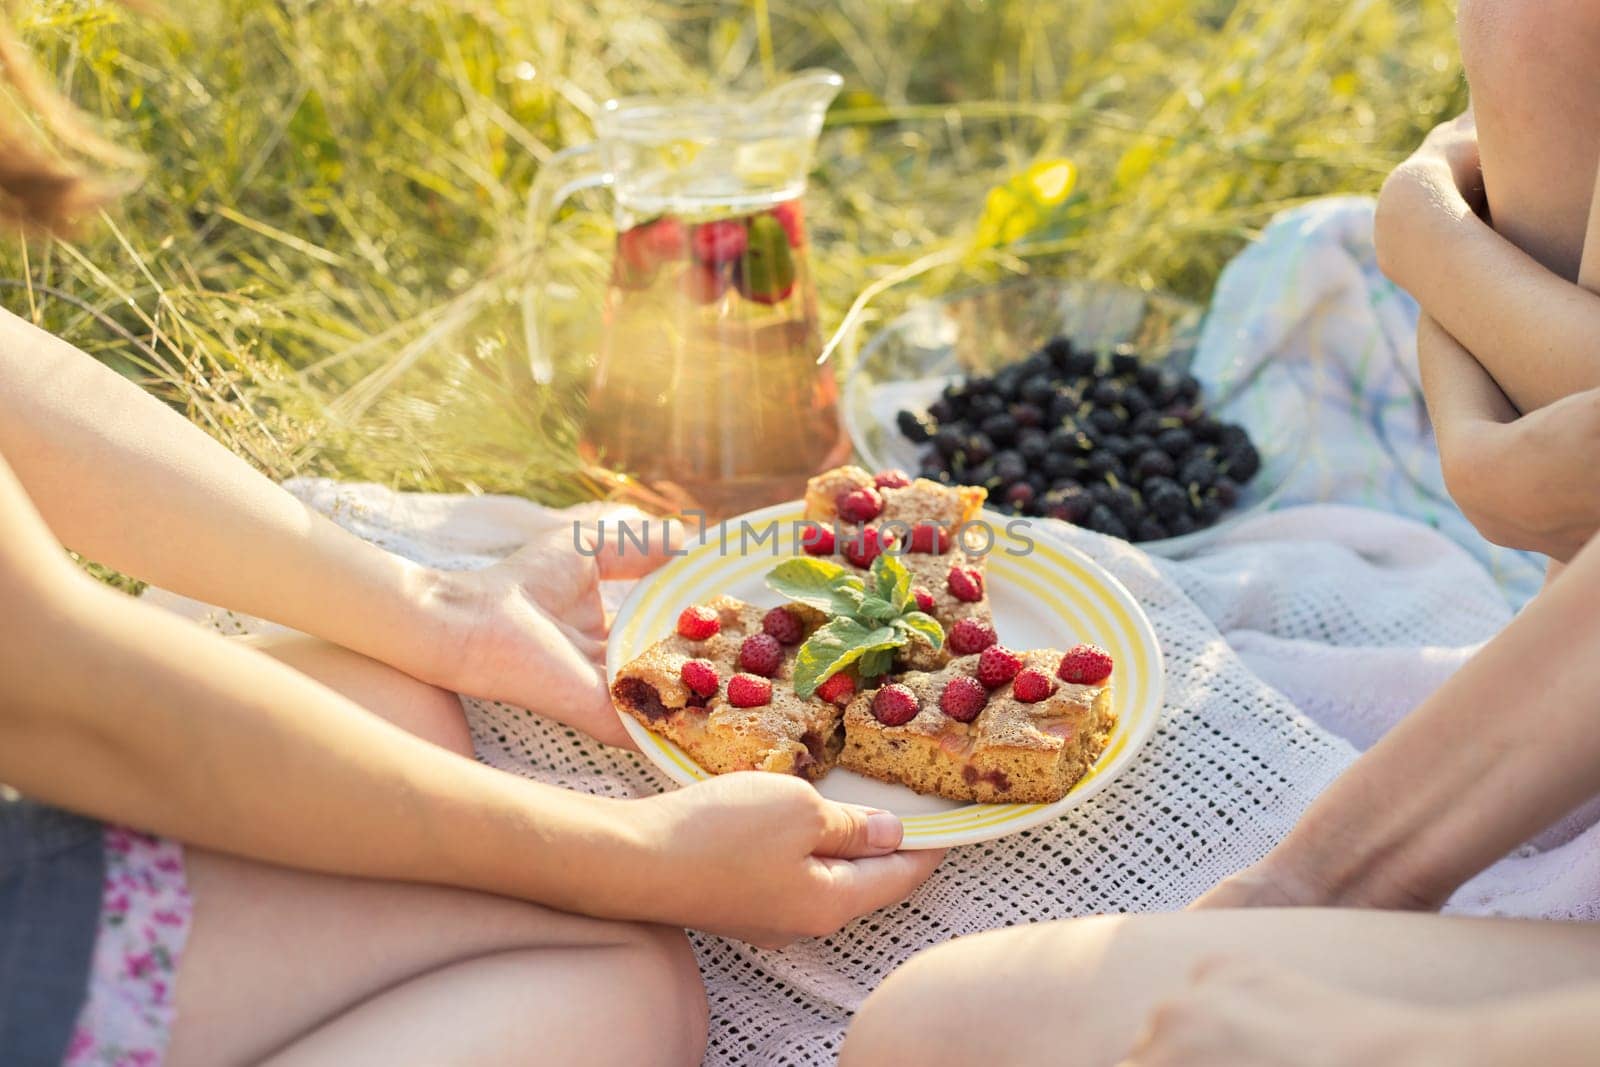 Summer picnic on sunny meadow, children sitting on grass eating homemade cake with berries, drinking mint strawberry drink